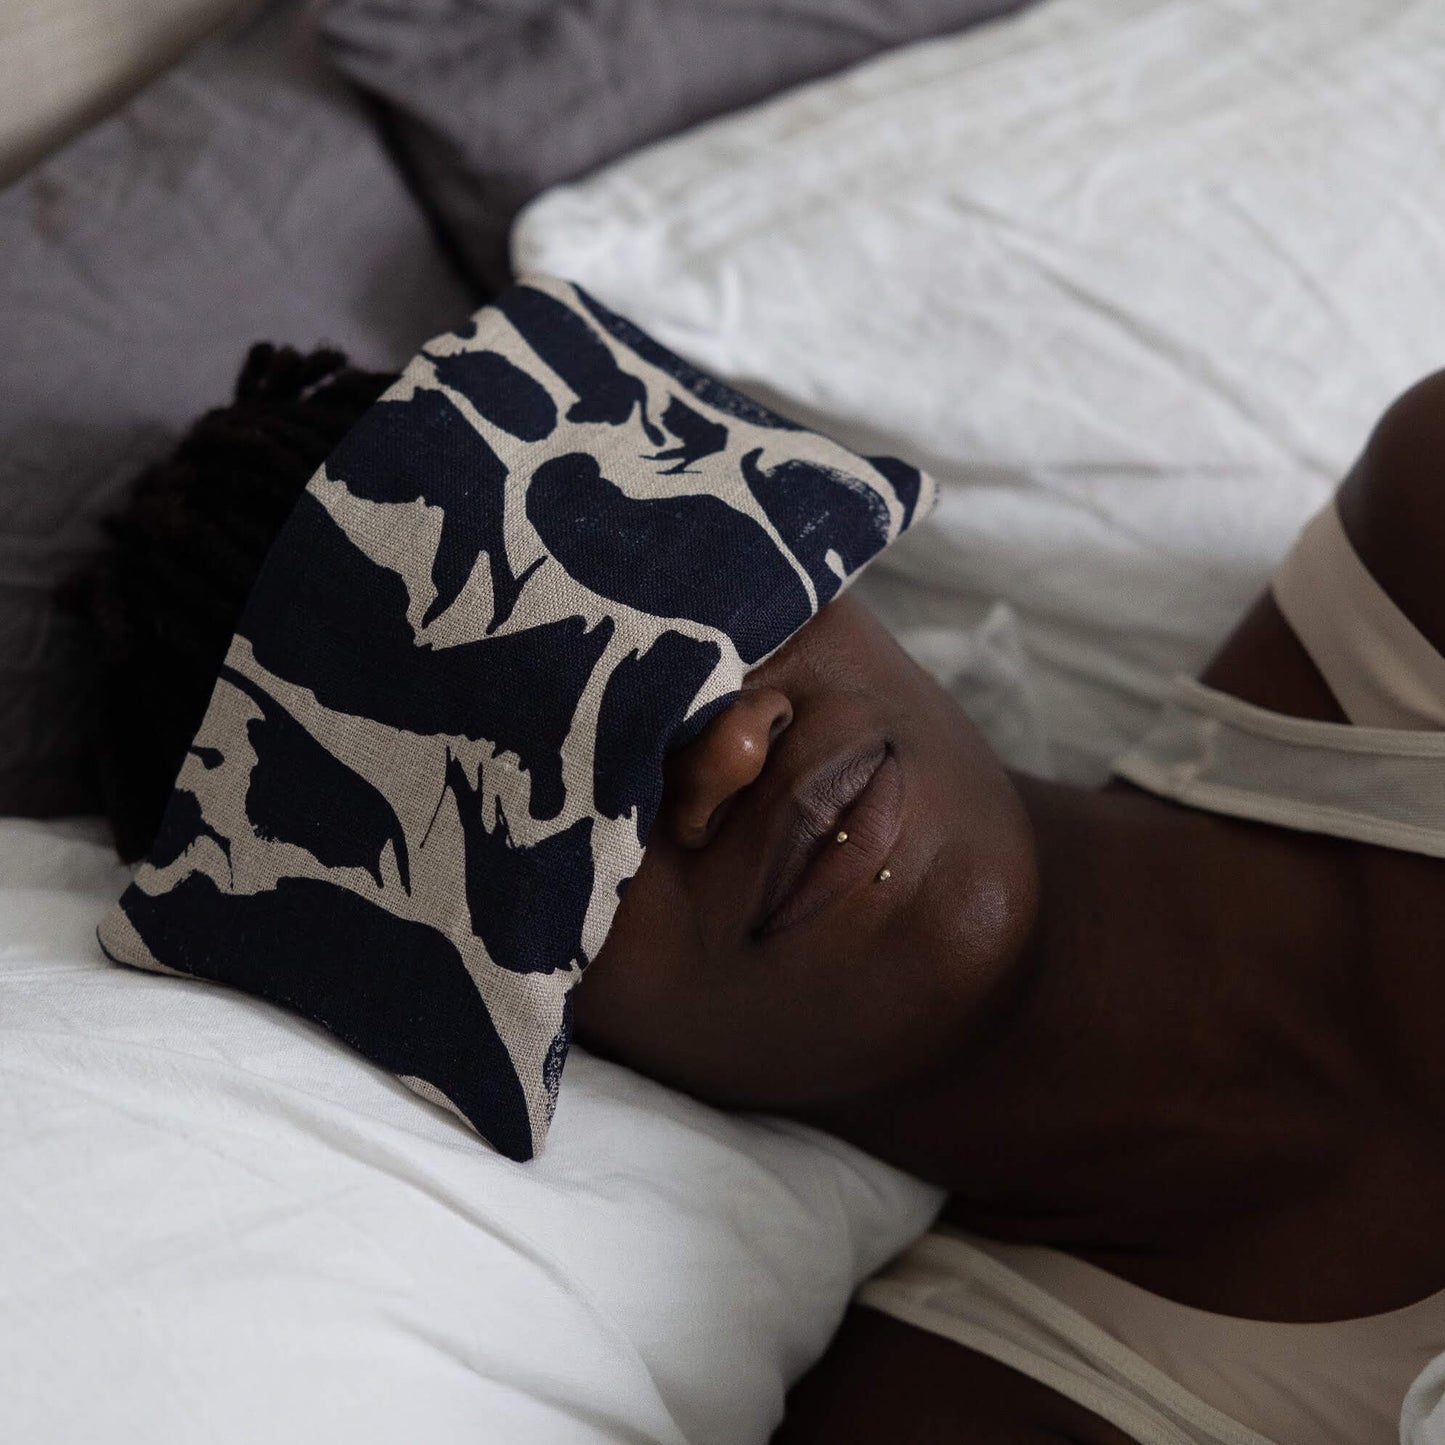 The Every Space hot and cold compress eye pillow in navy blue patterned linen and filled with wheat by Blästa Henriët